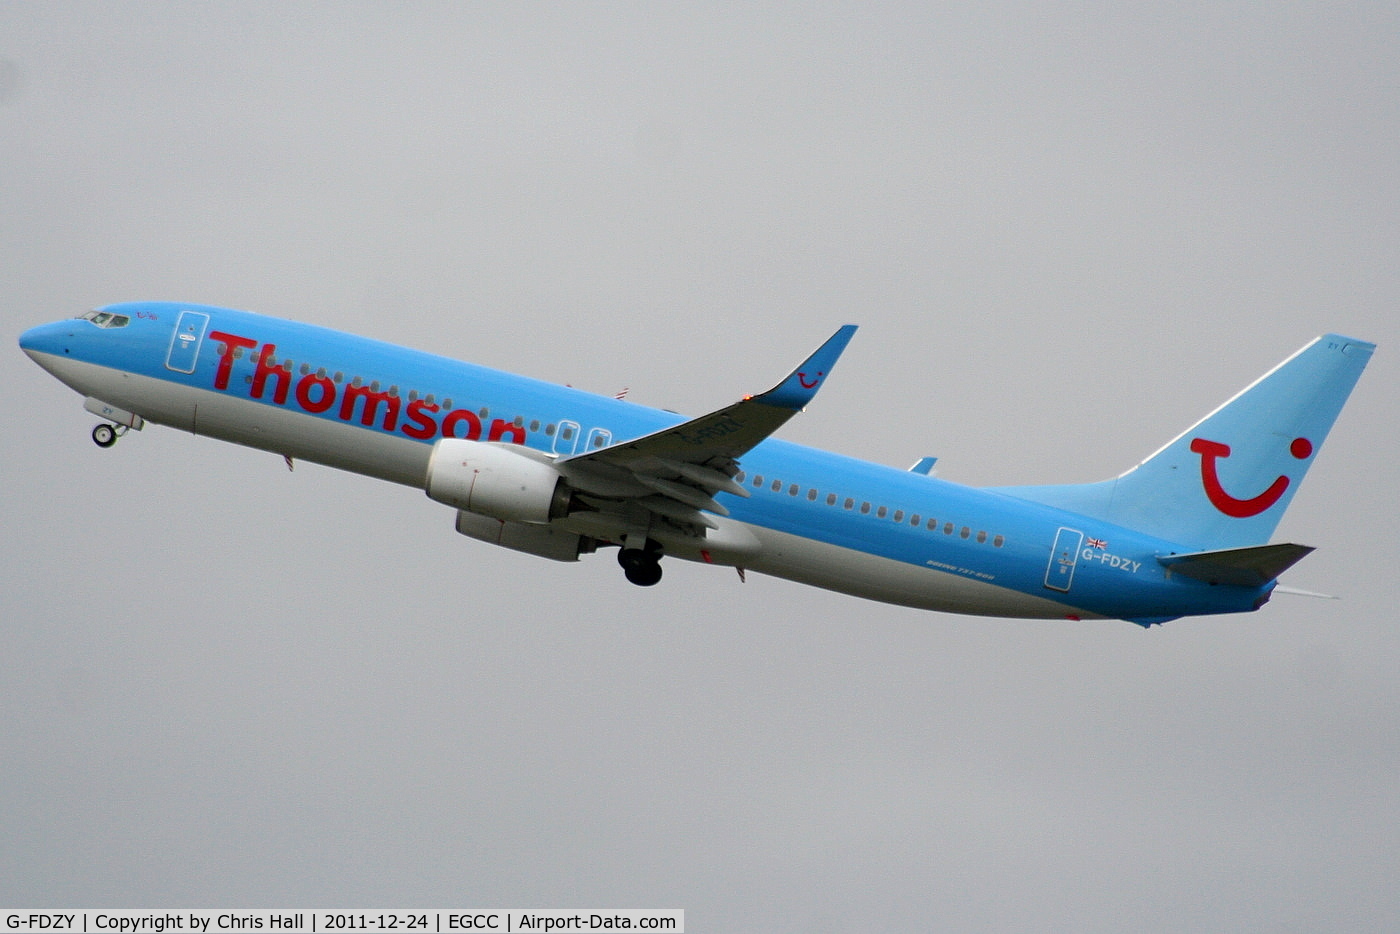 G-FDZY, 2011 Boeing 737-8K5 C/N 37261, New B737 for Thomson, delivered 23-11-2011